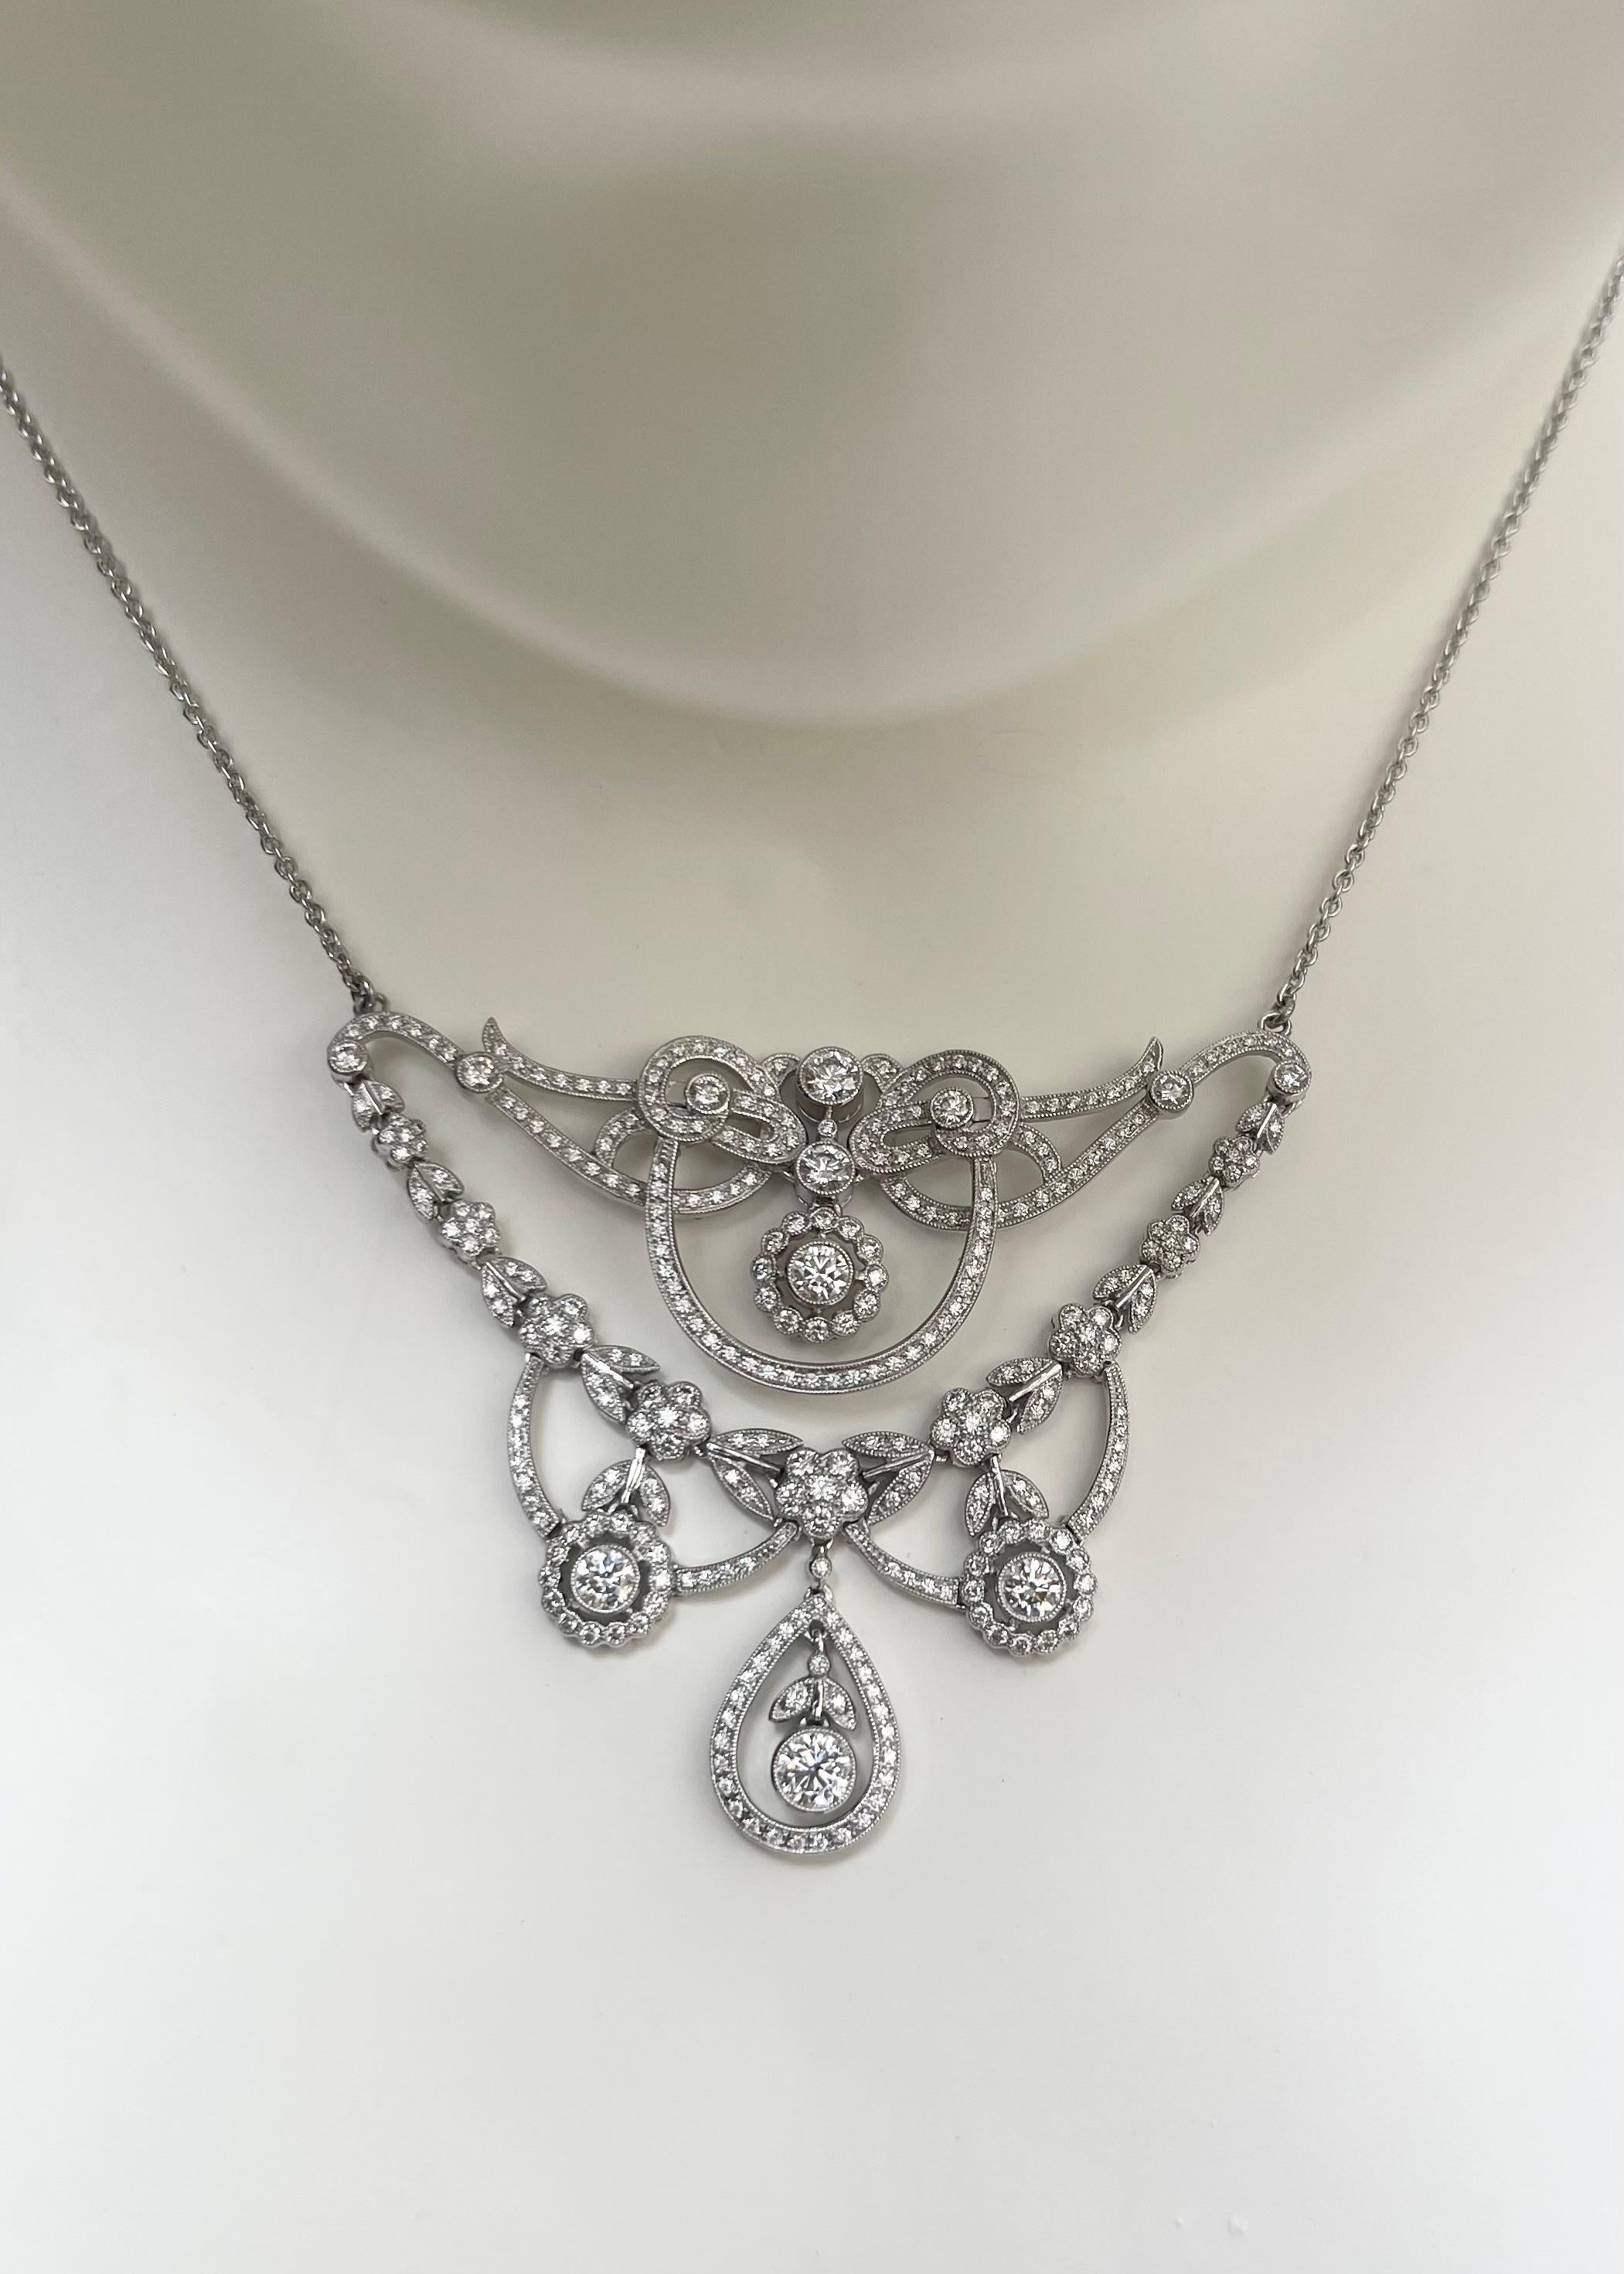 Diamond 2.49 carats Necklace set in 18K White Gold Settings

Width: 5.5 cm 
Length: 54.0 cm
Total Weight: 18.39 grams

